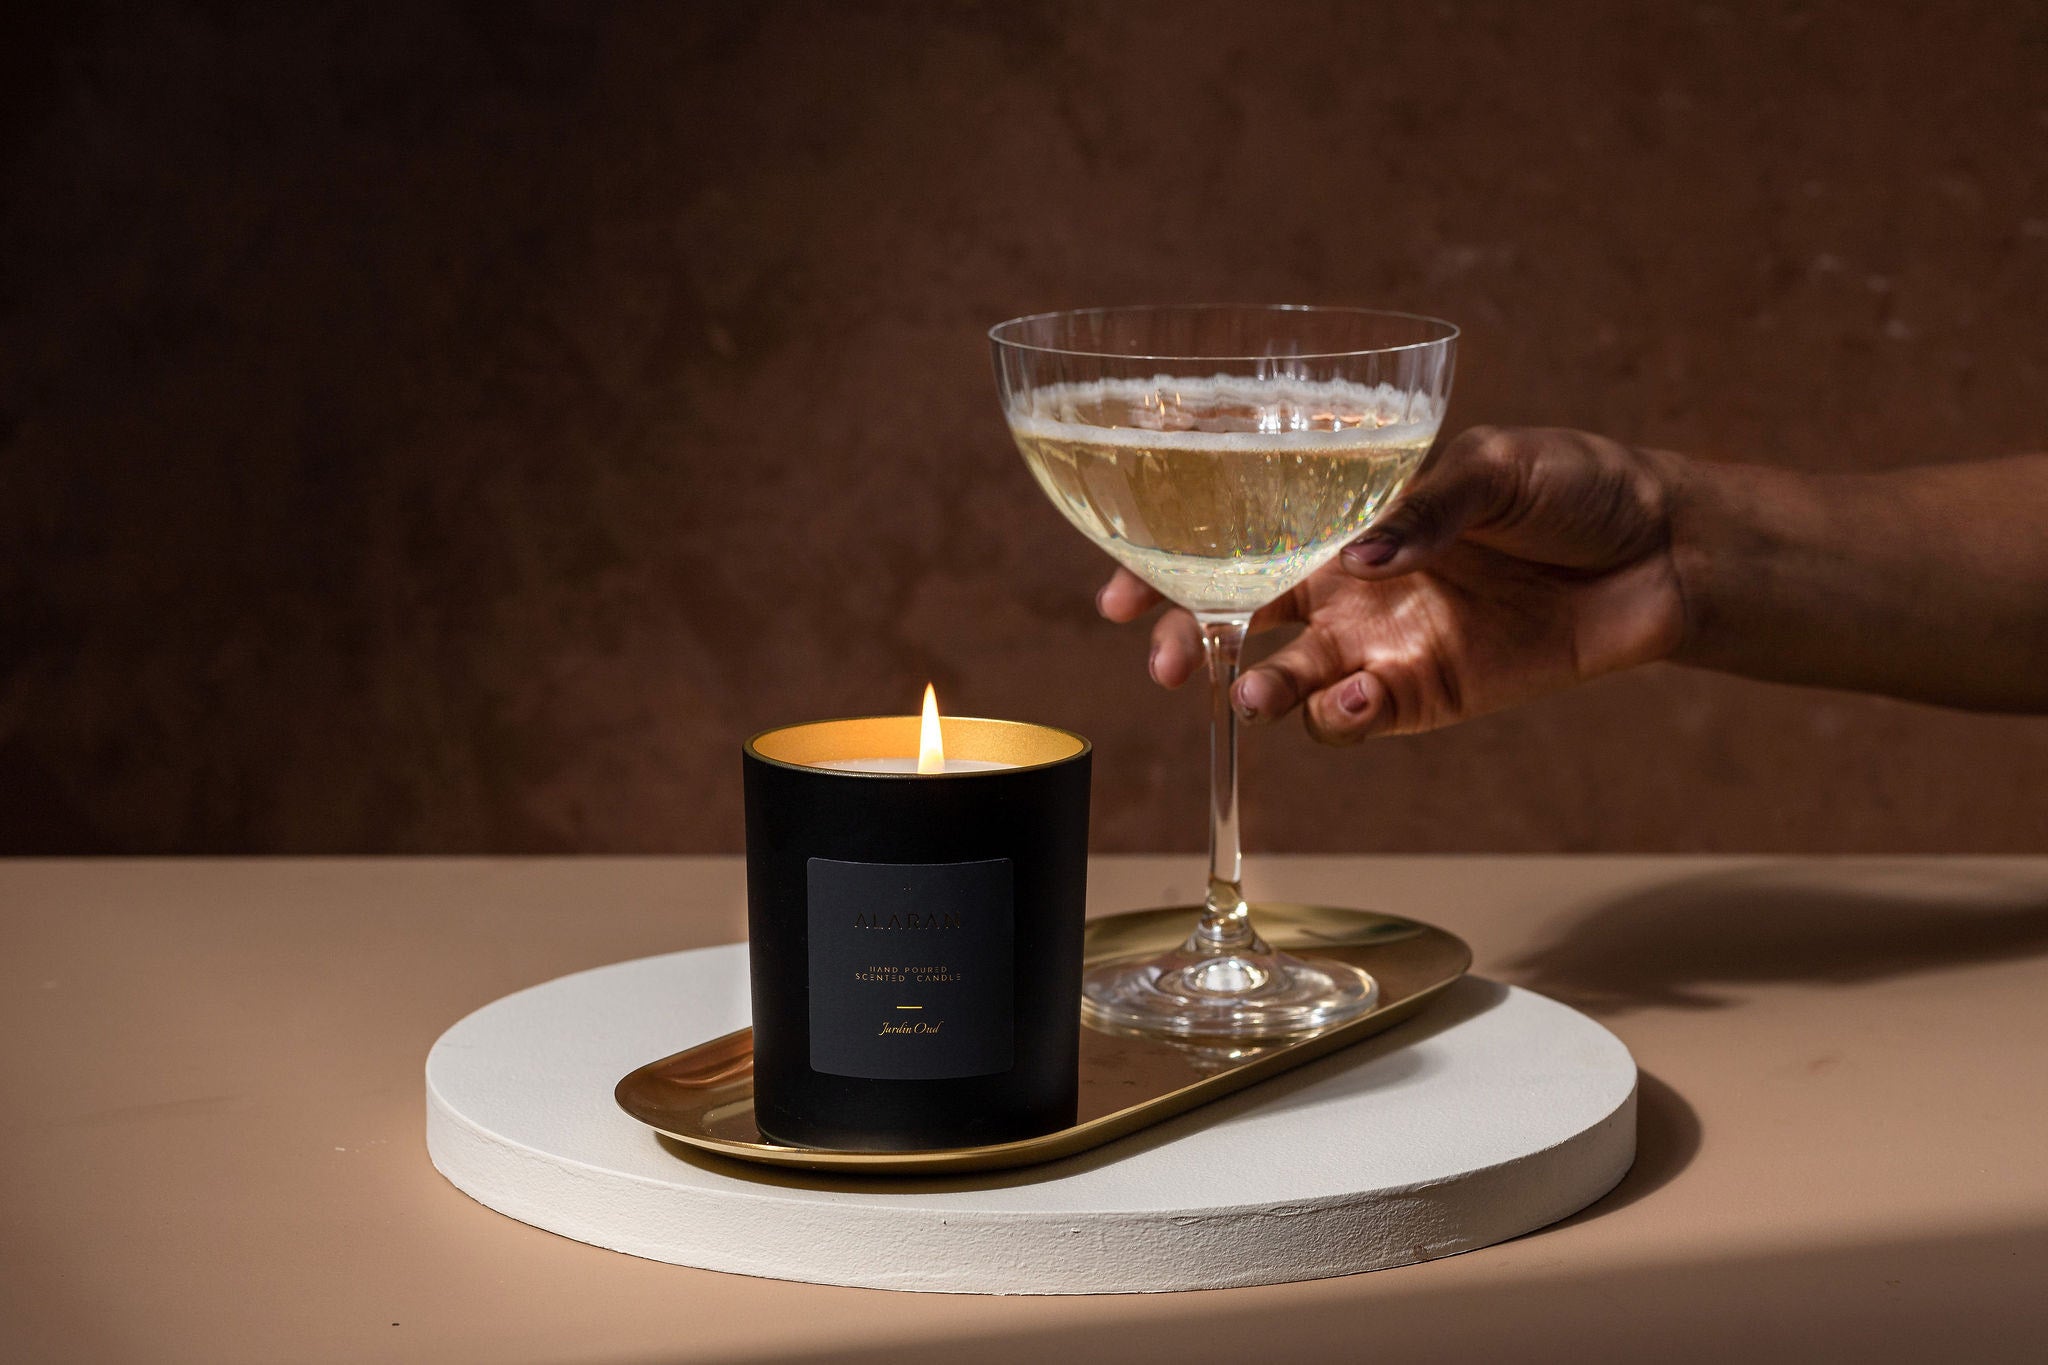 Jardin Oud lit candle on a gold tray next to champagne glass being picked up by a hand on a brown background